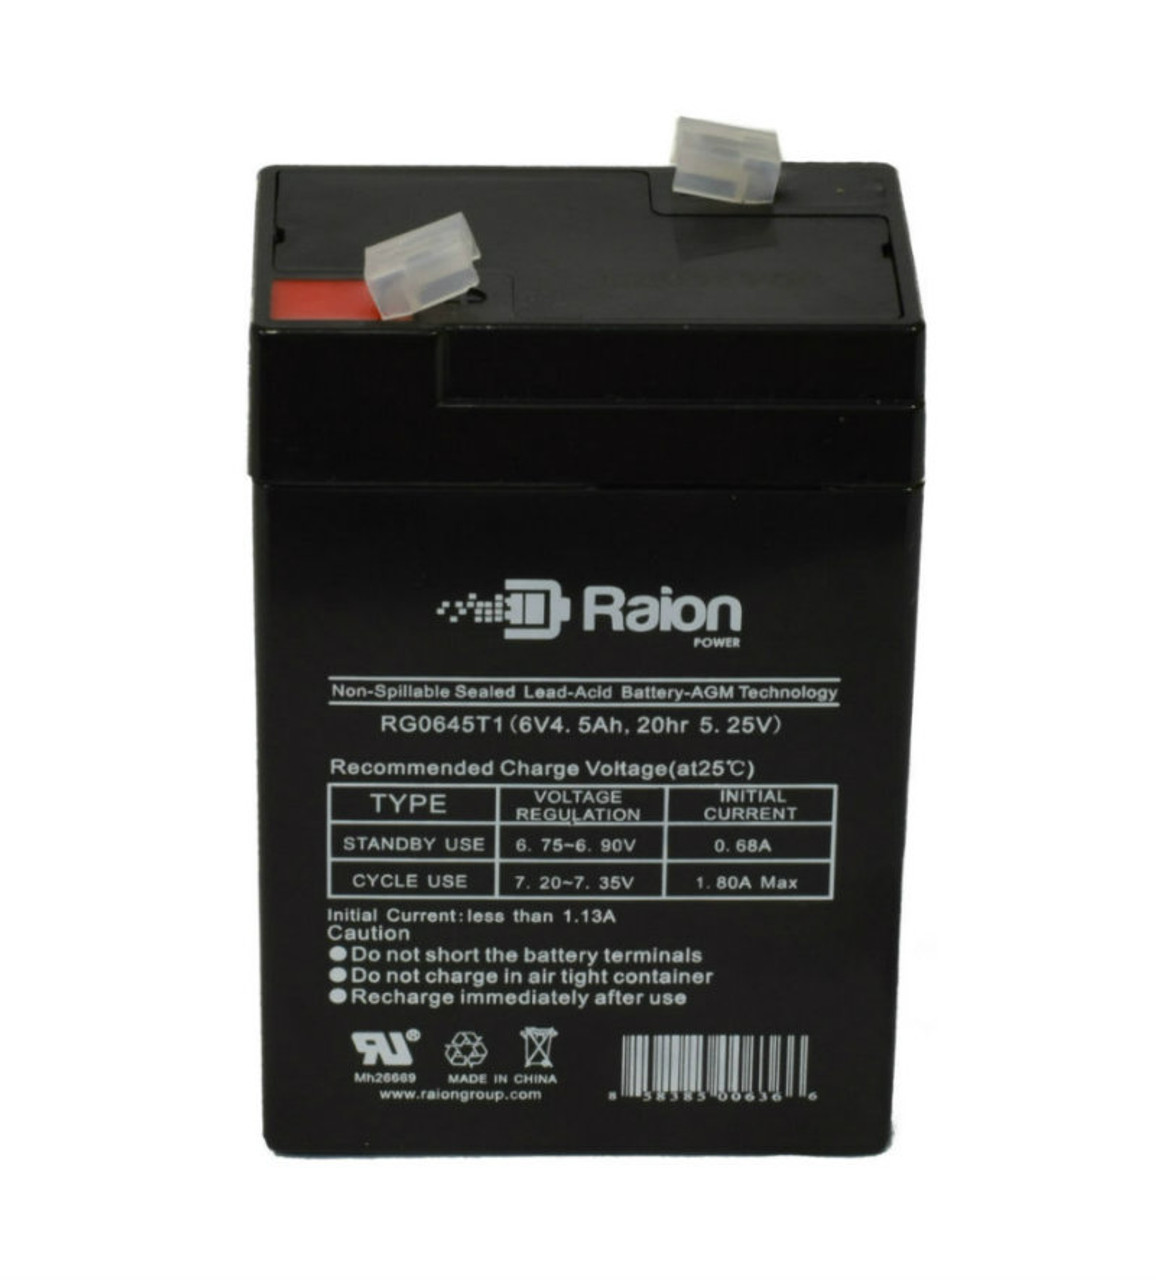 Raion Power RG0645T1 Replacement Battery Cartridge for Consent GS64-5